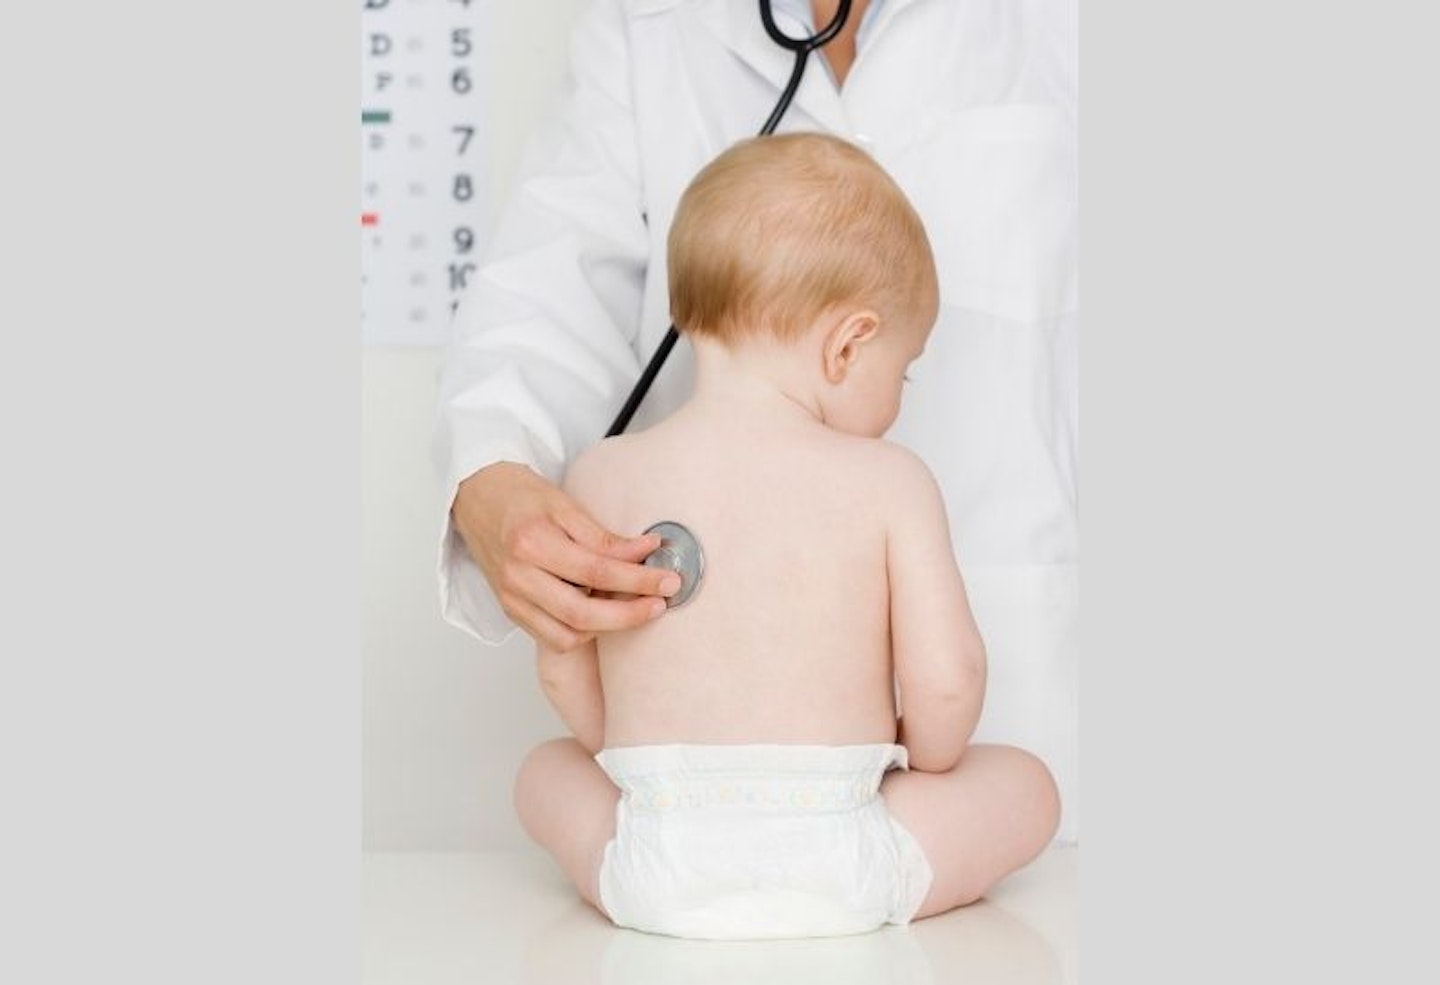 Bronchiolitis - doctor listening to baby back